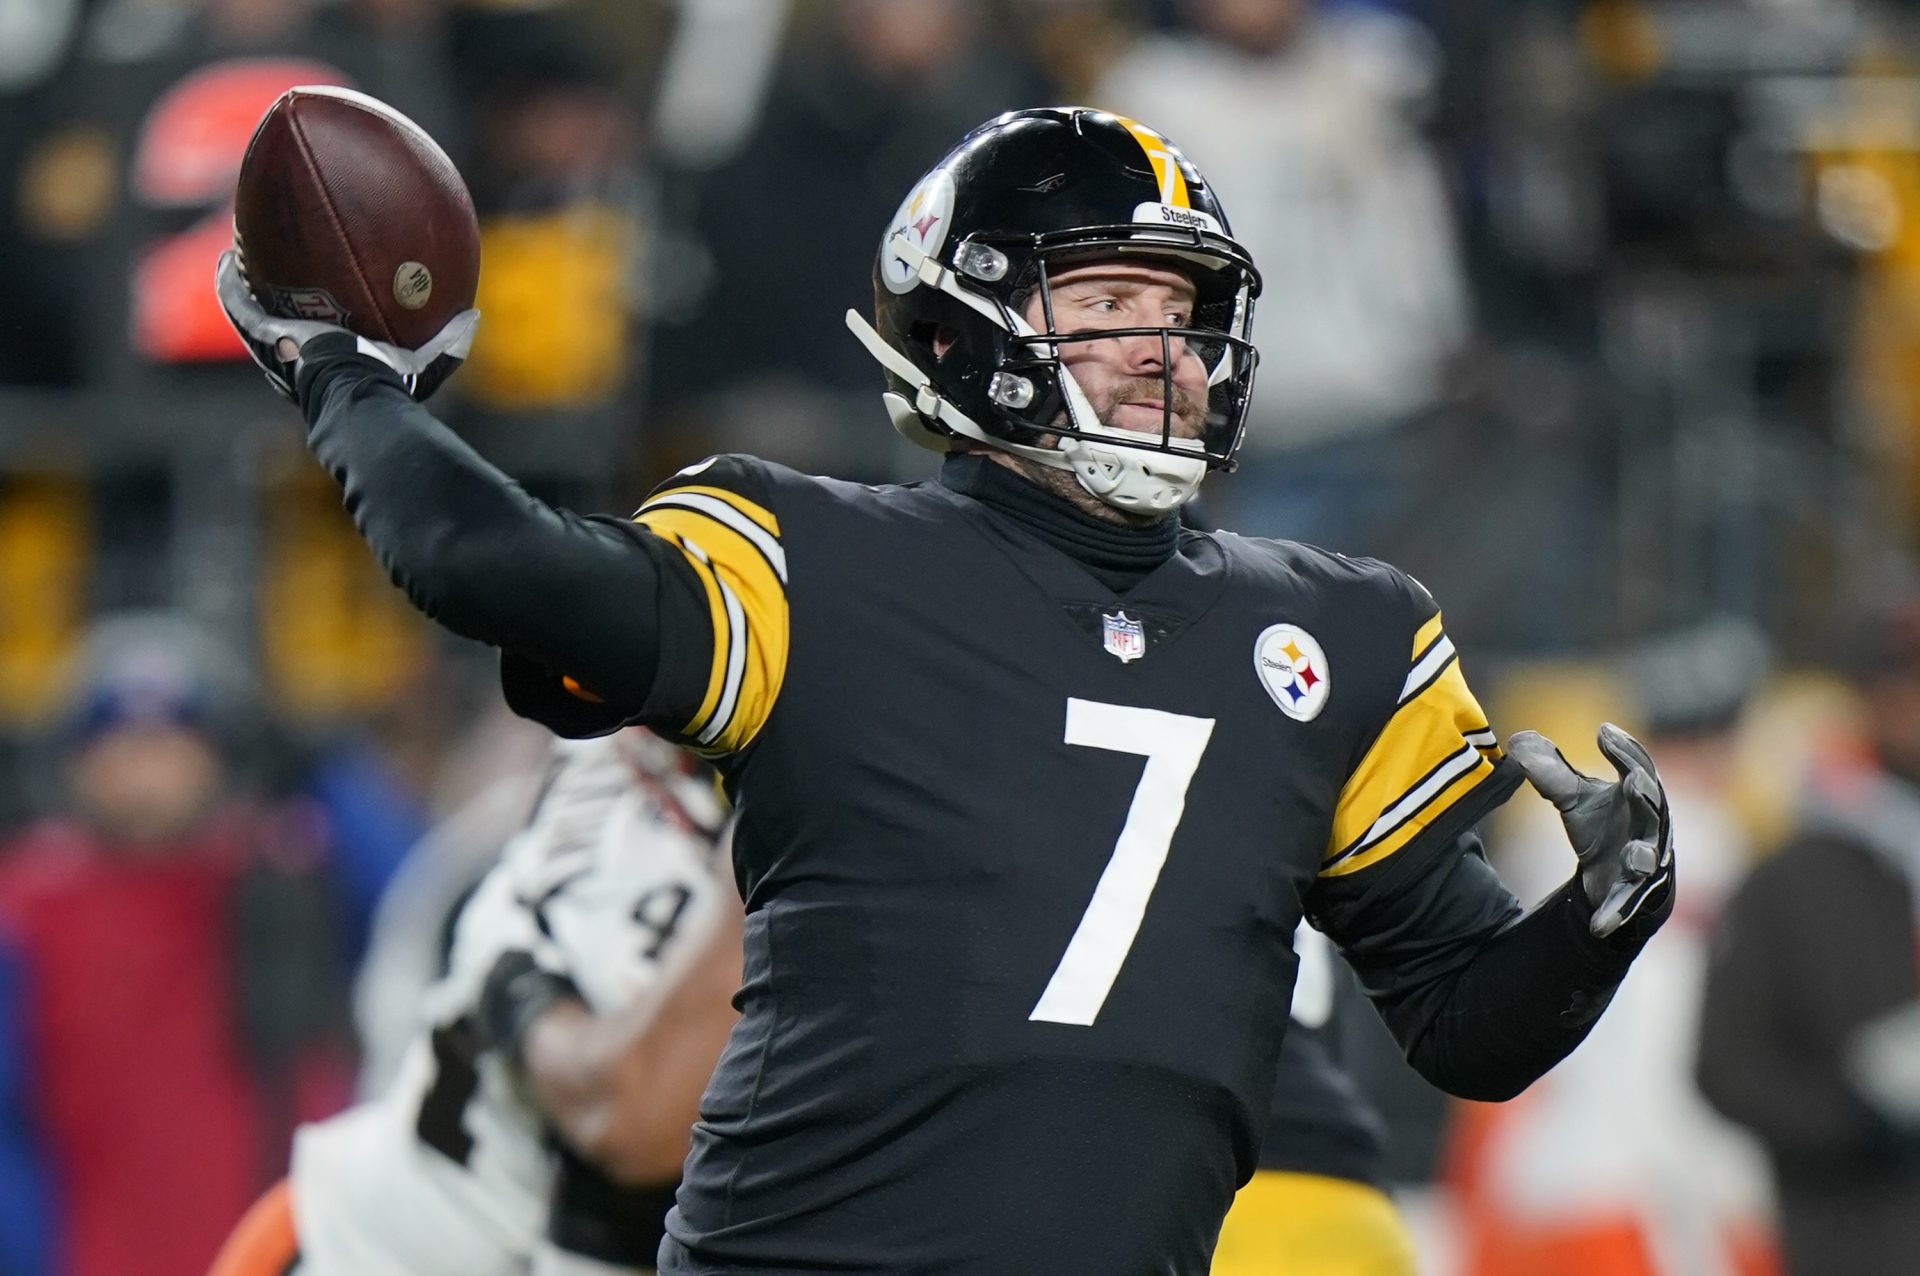 Pittsburgh Steelers quarterback Ben Roethlisberger passes in the first half of an NFL football game against the Cleveland Browns, Monday, Jan. 3, 2022, in Pittsburgh.